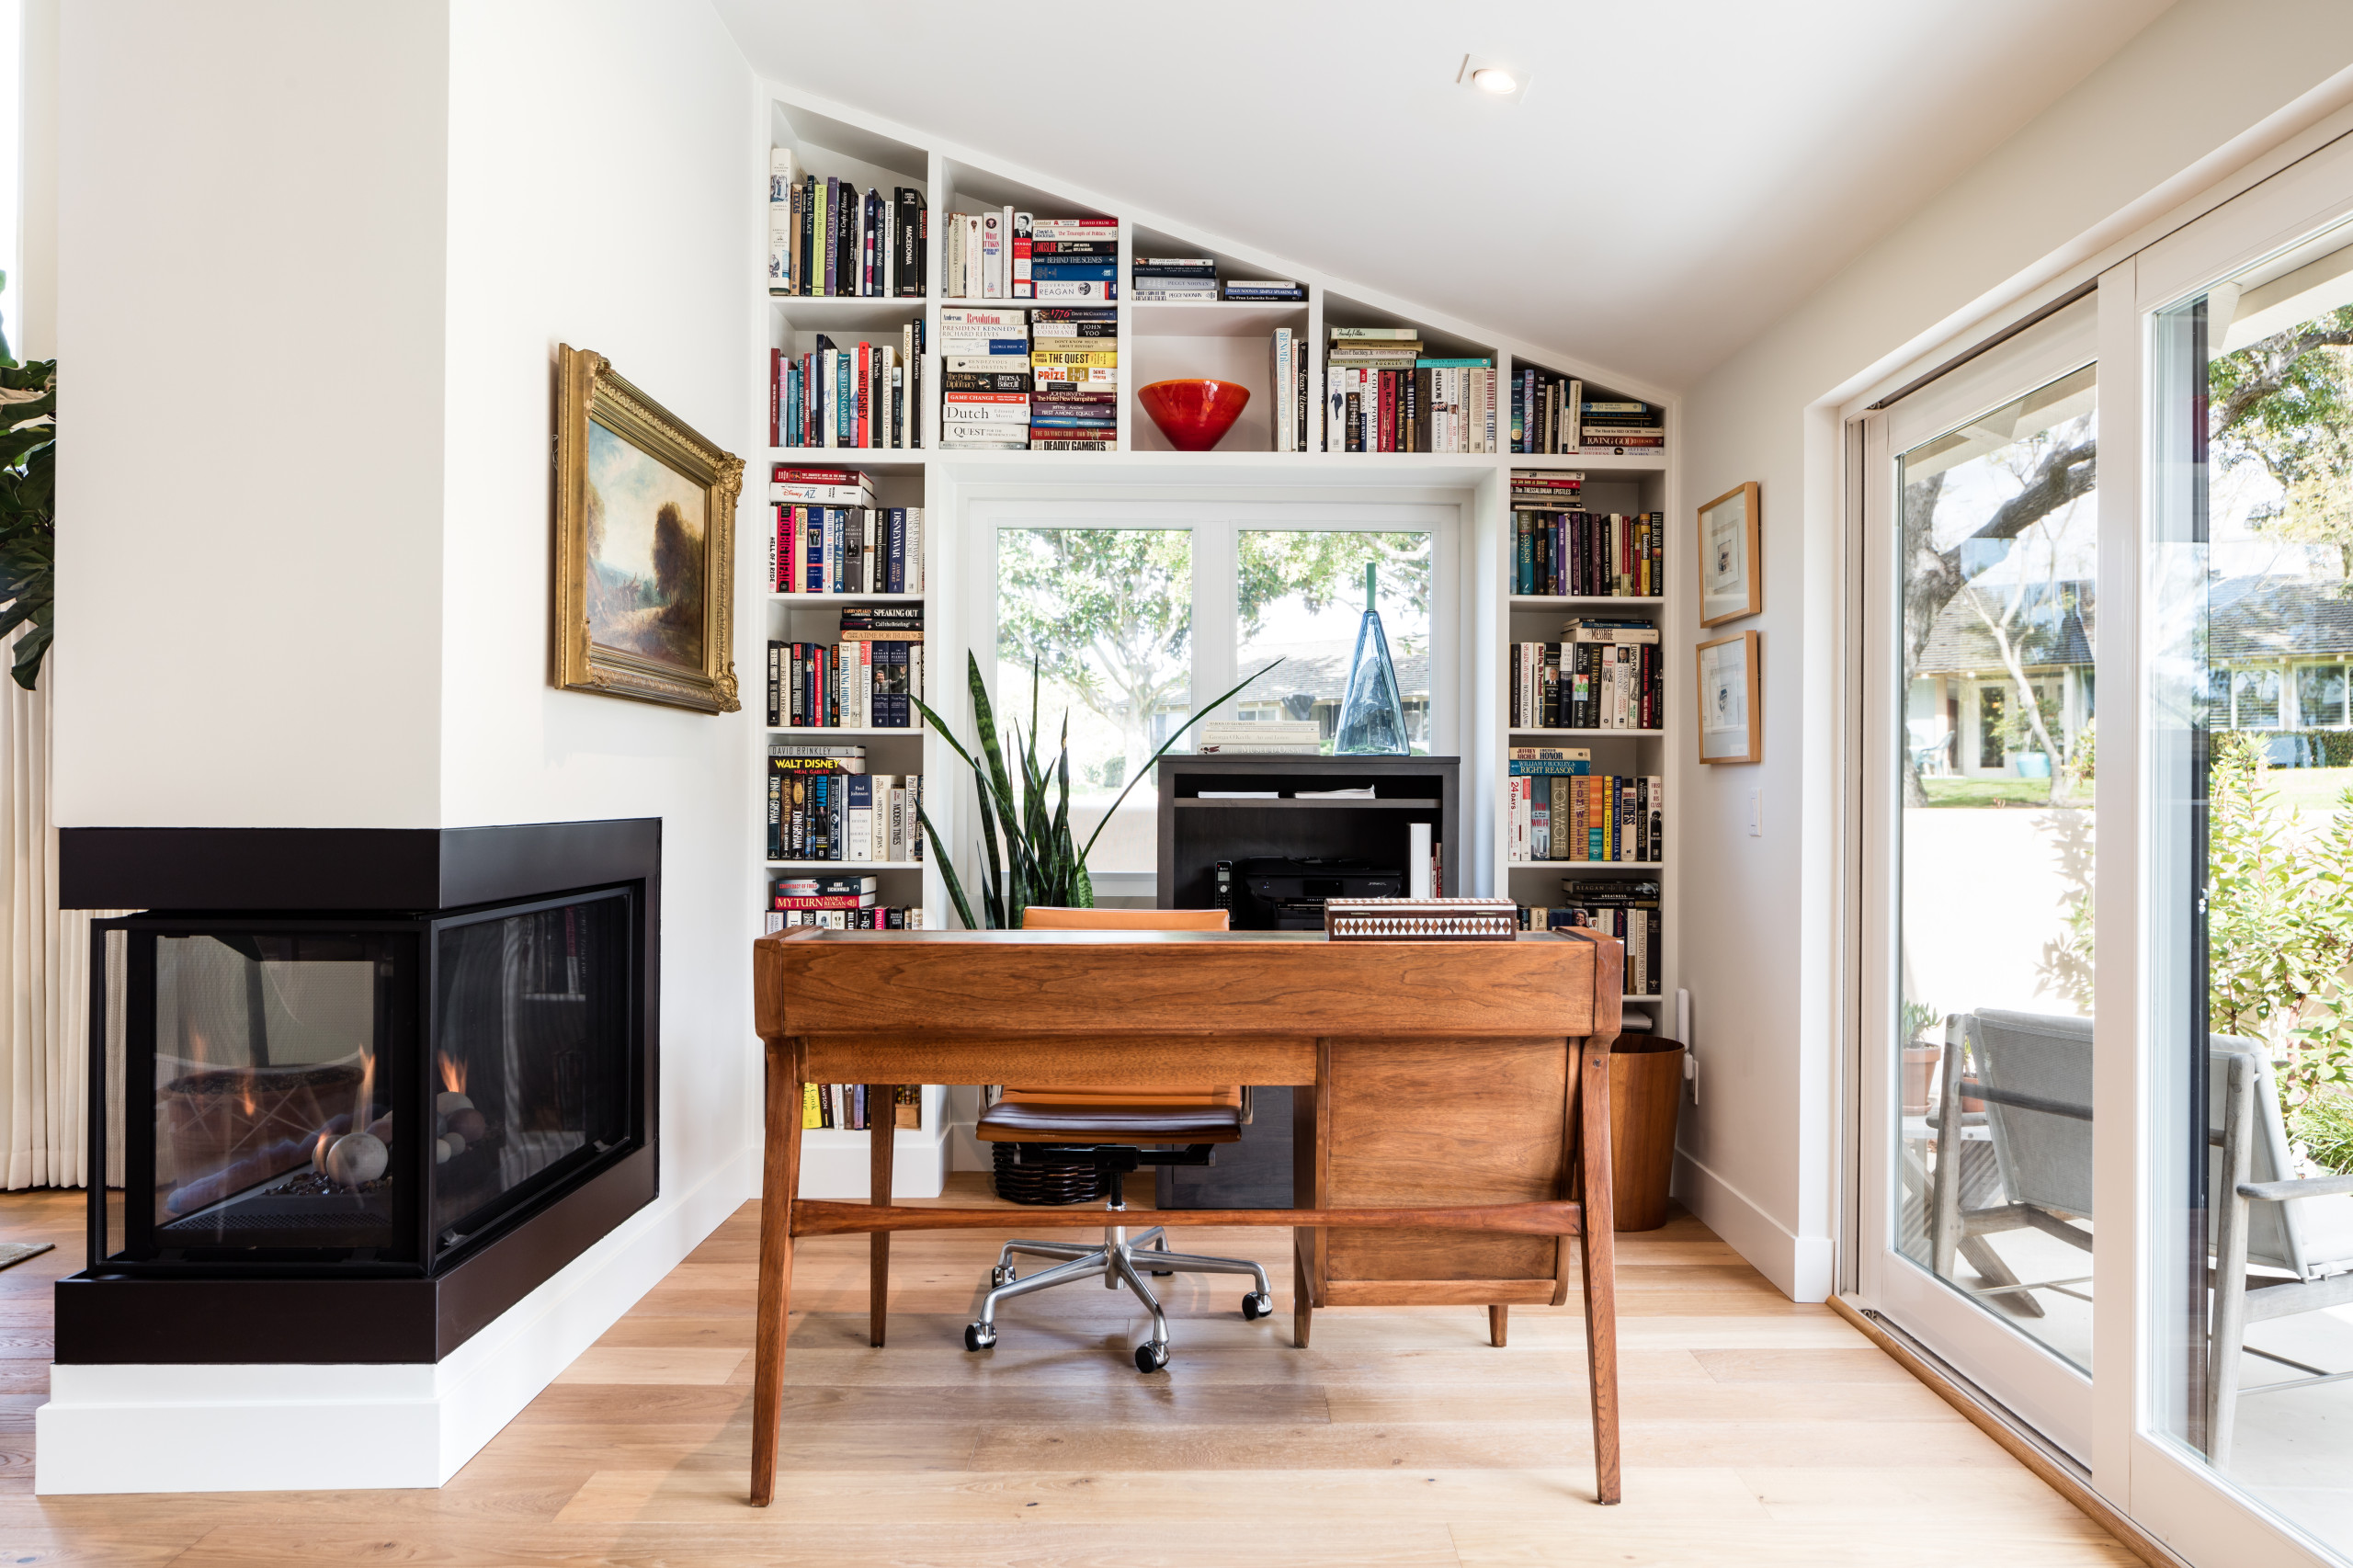 18 Beautiful Home Office Pictures Ideas October 2020 Houzz,Colors That Go Well With Red And White